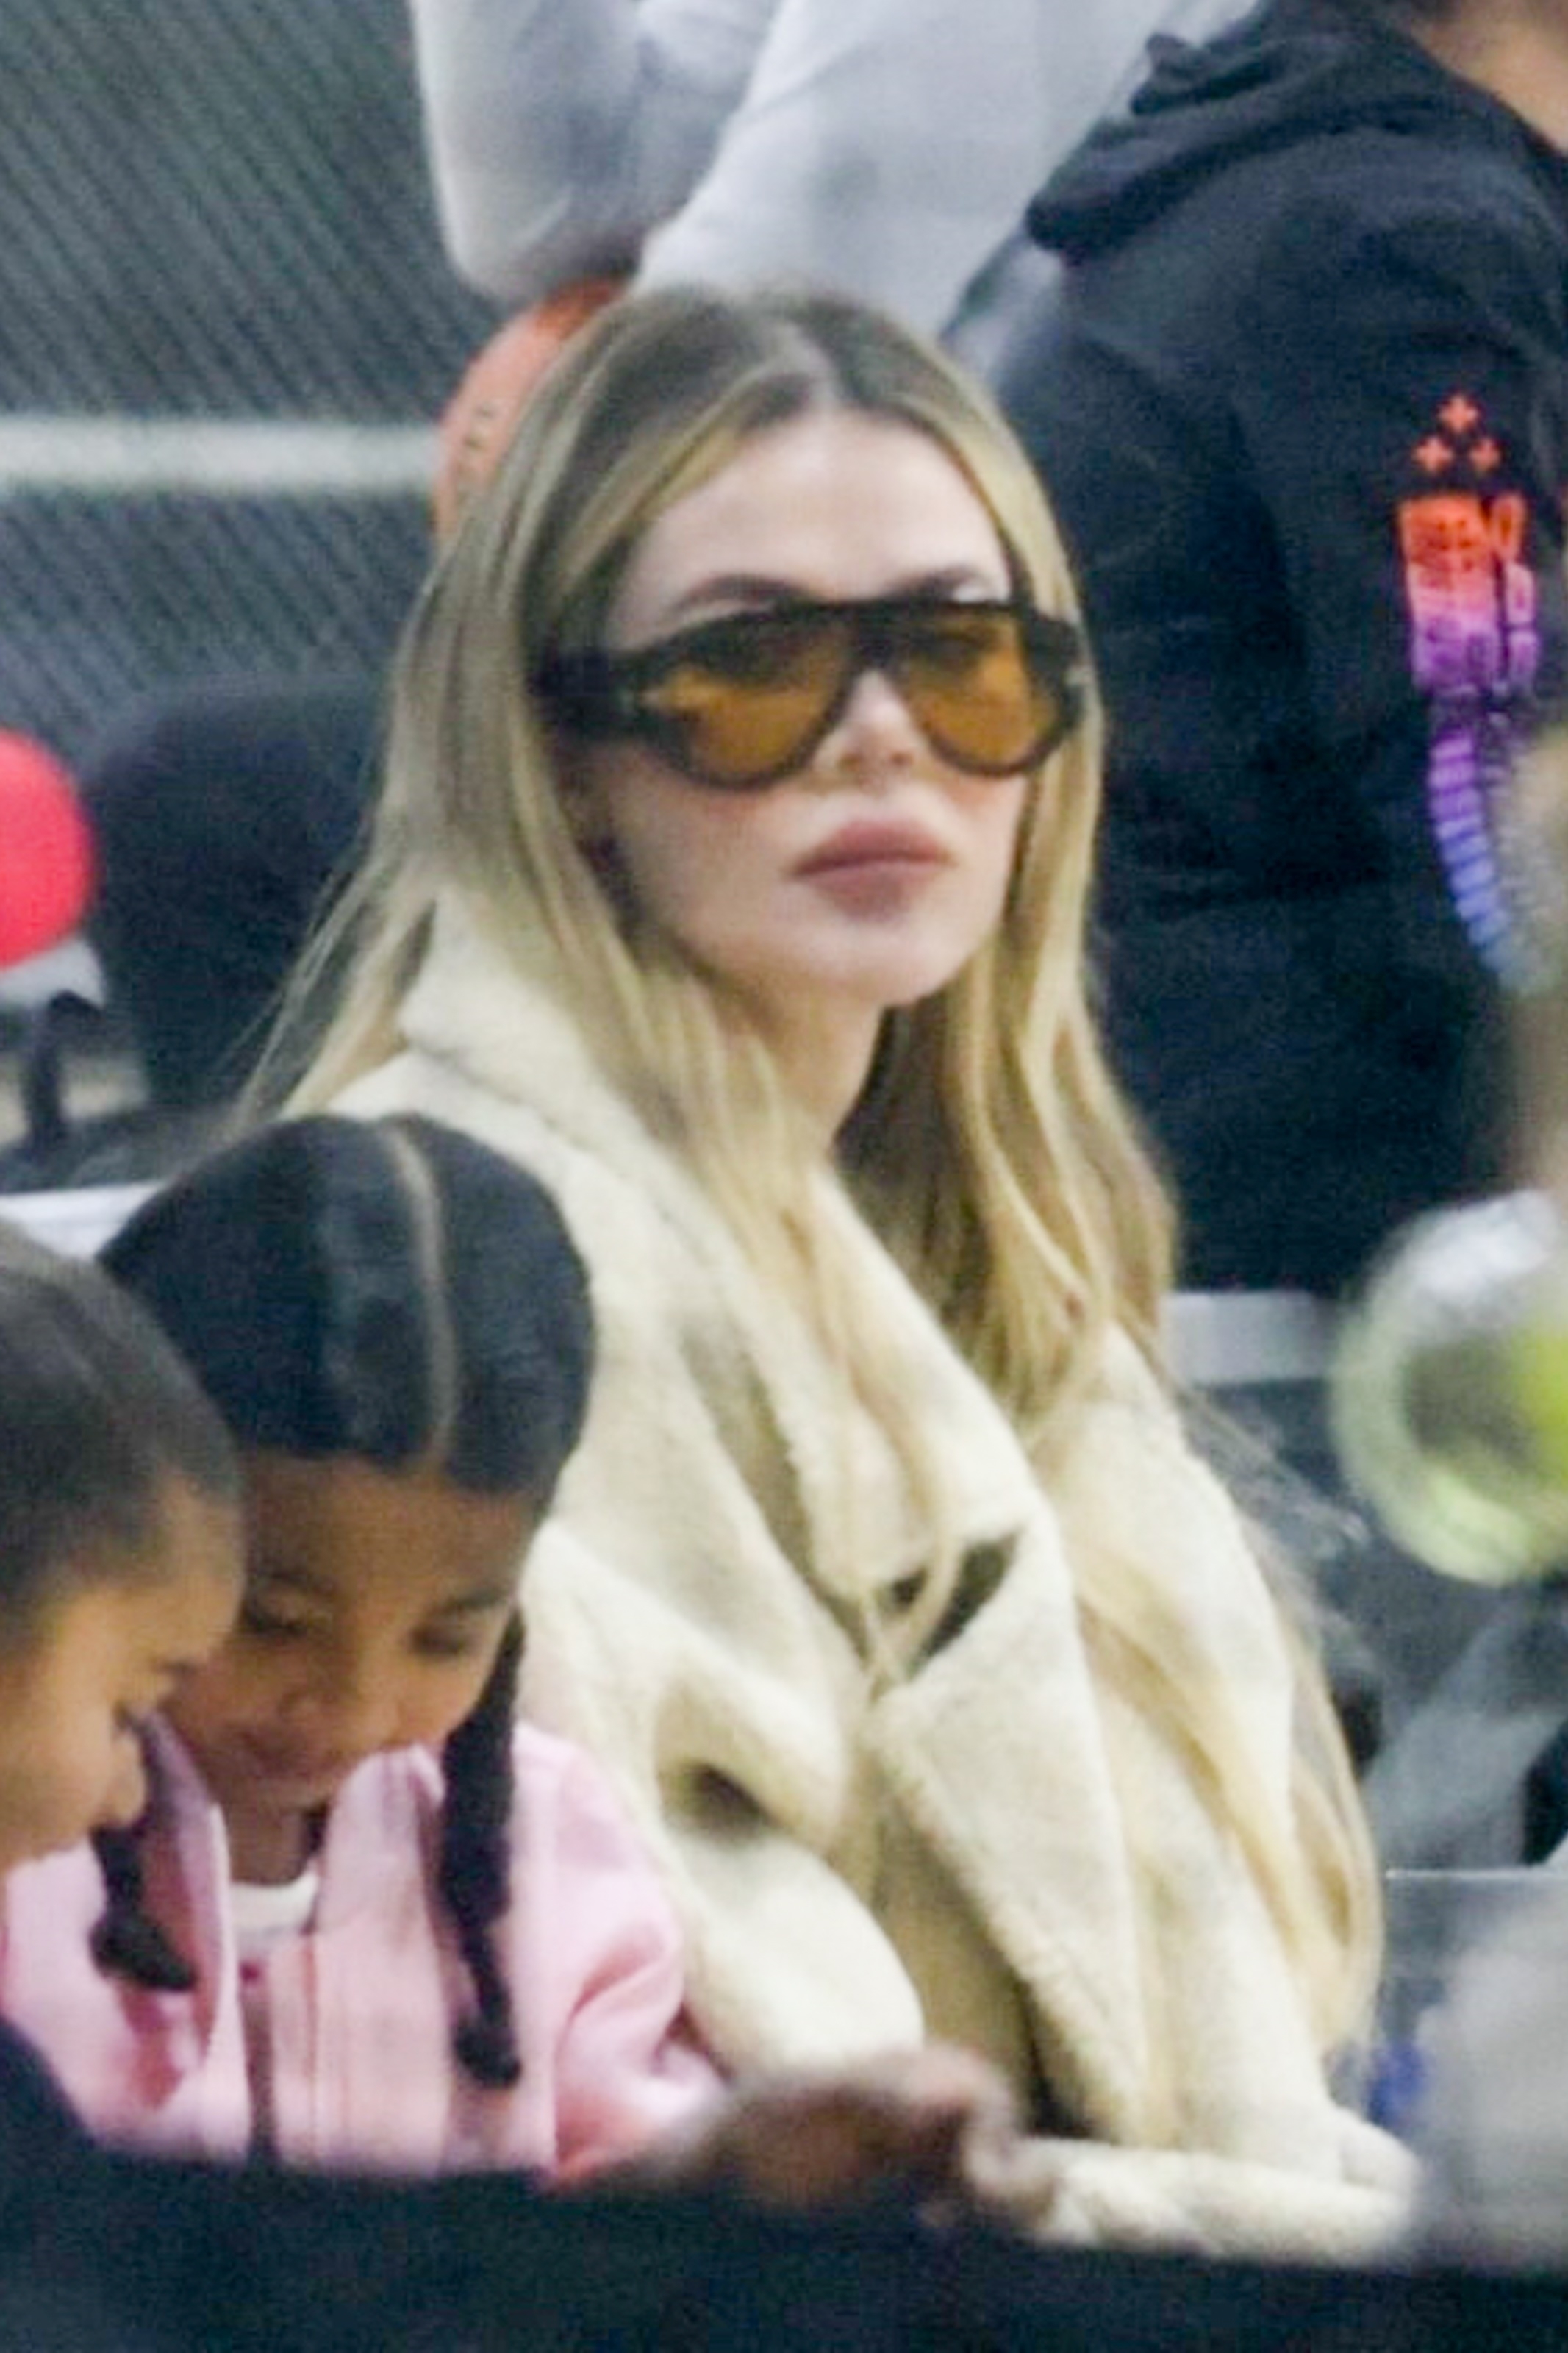 Khloe sat with the daughters she shares with Tristan Thompson